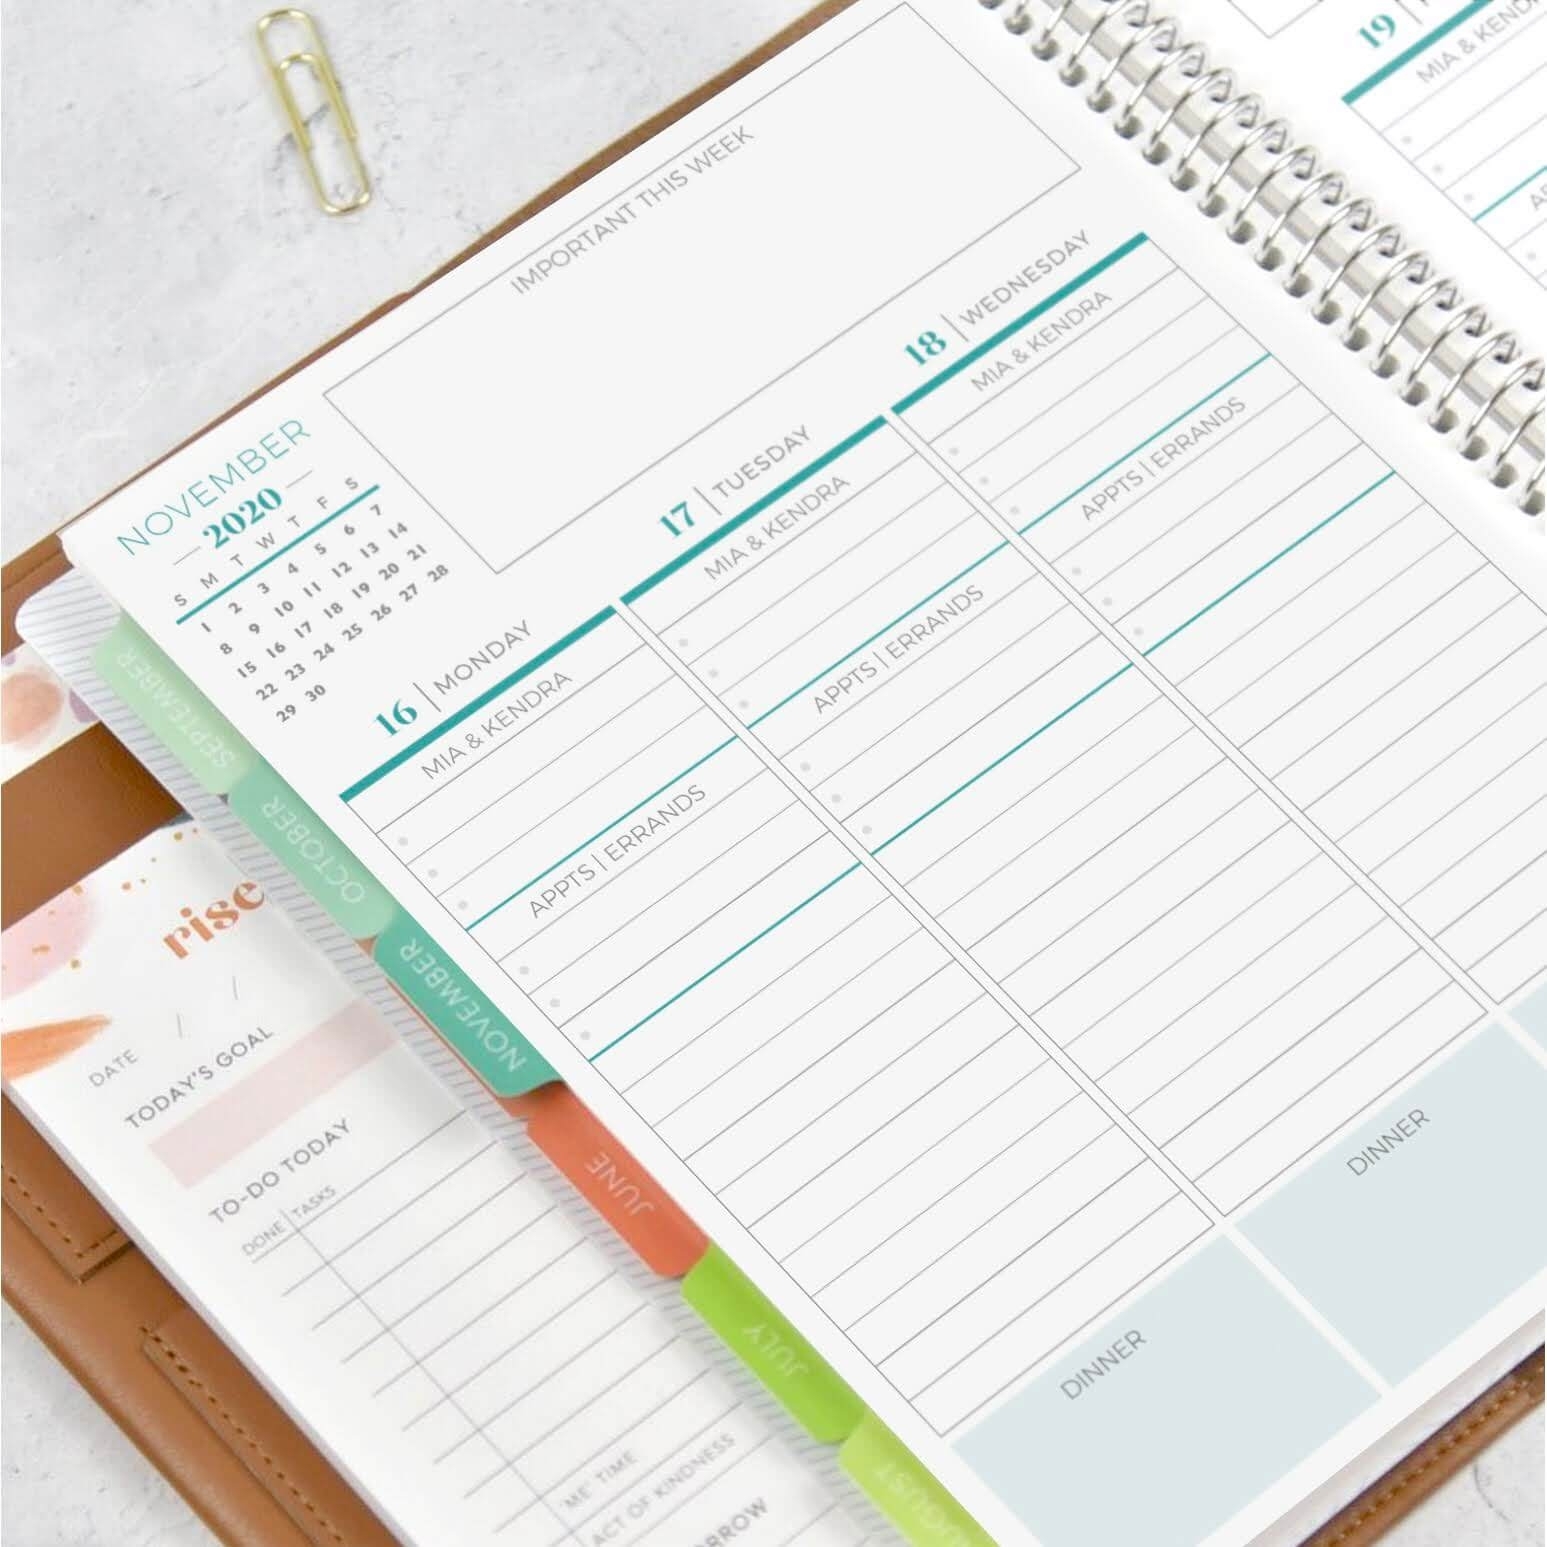 6 Best Planners For 2021: Daily, Weekly, And Monthly Planners